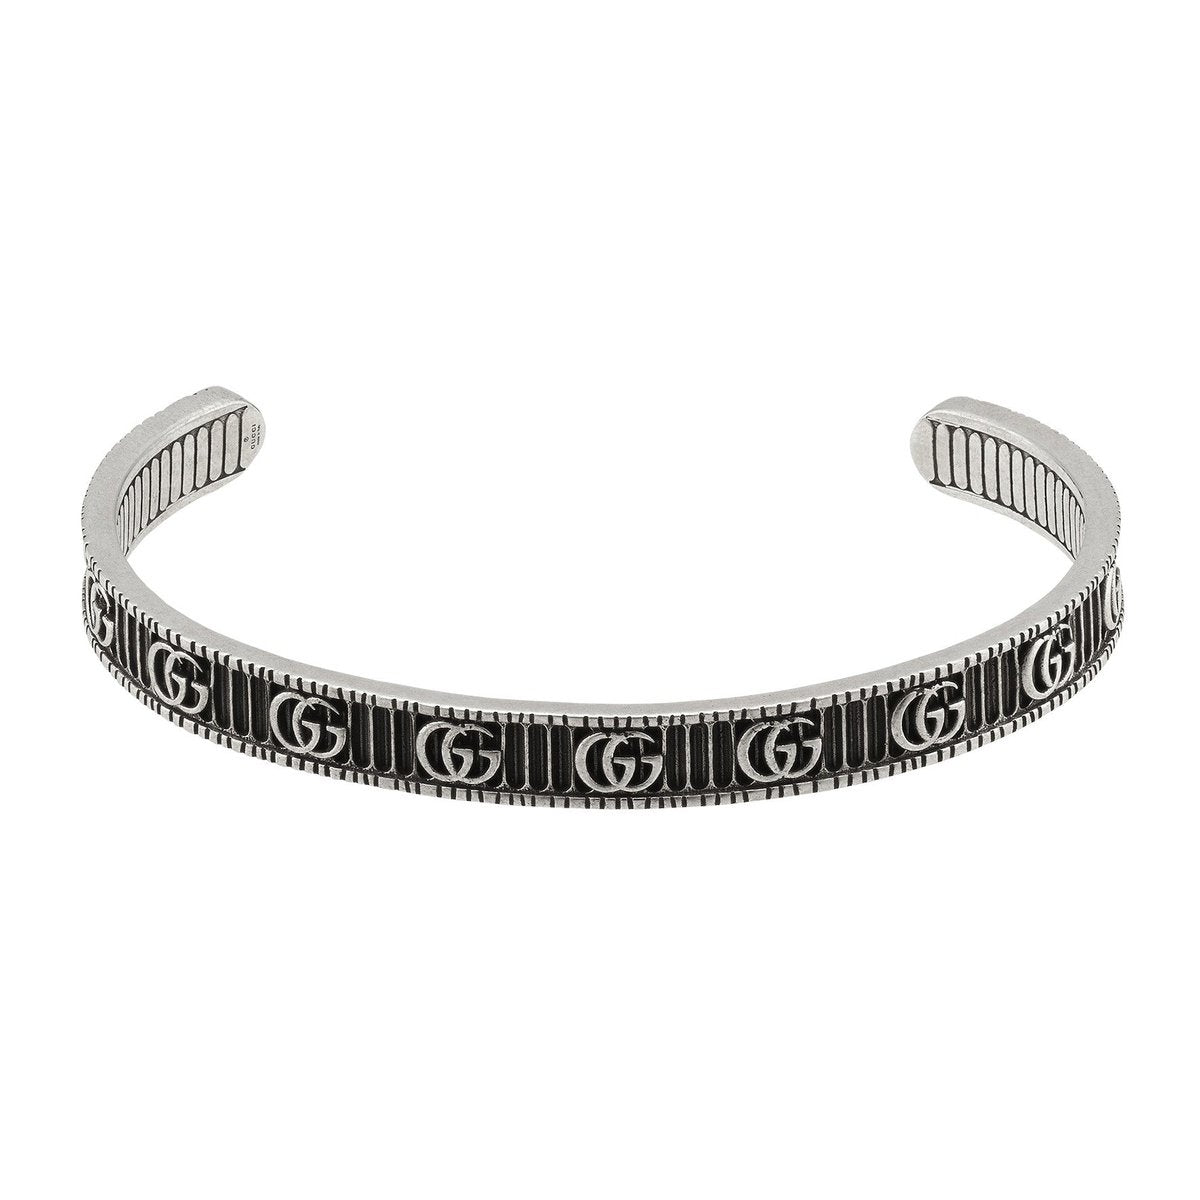 Bracelet with Double G in silver YBA551903001 Gucci Jewelry